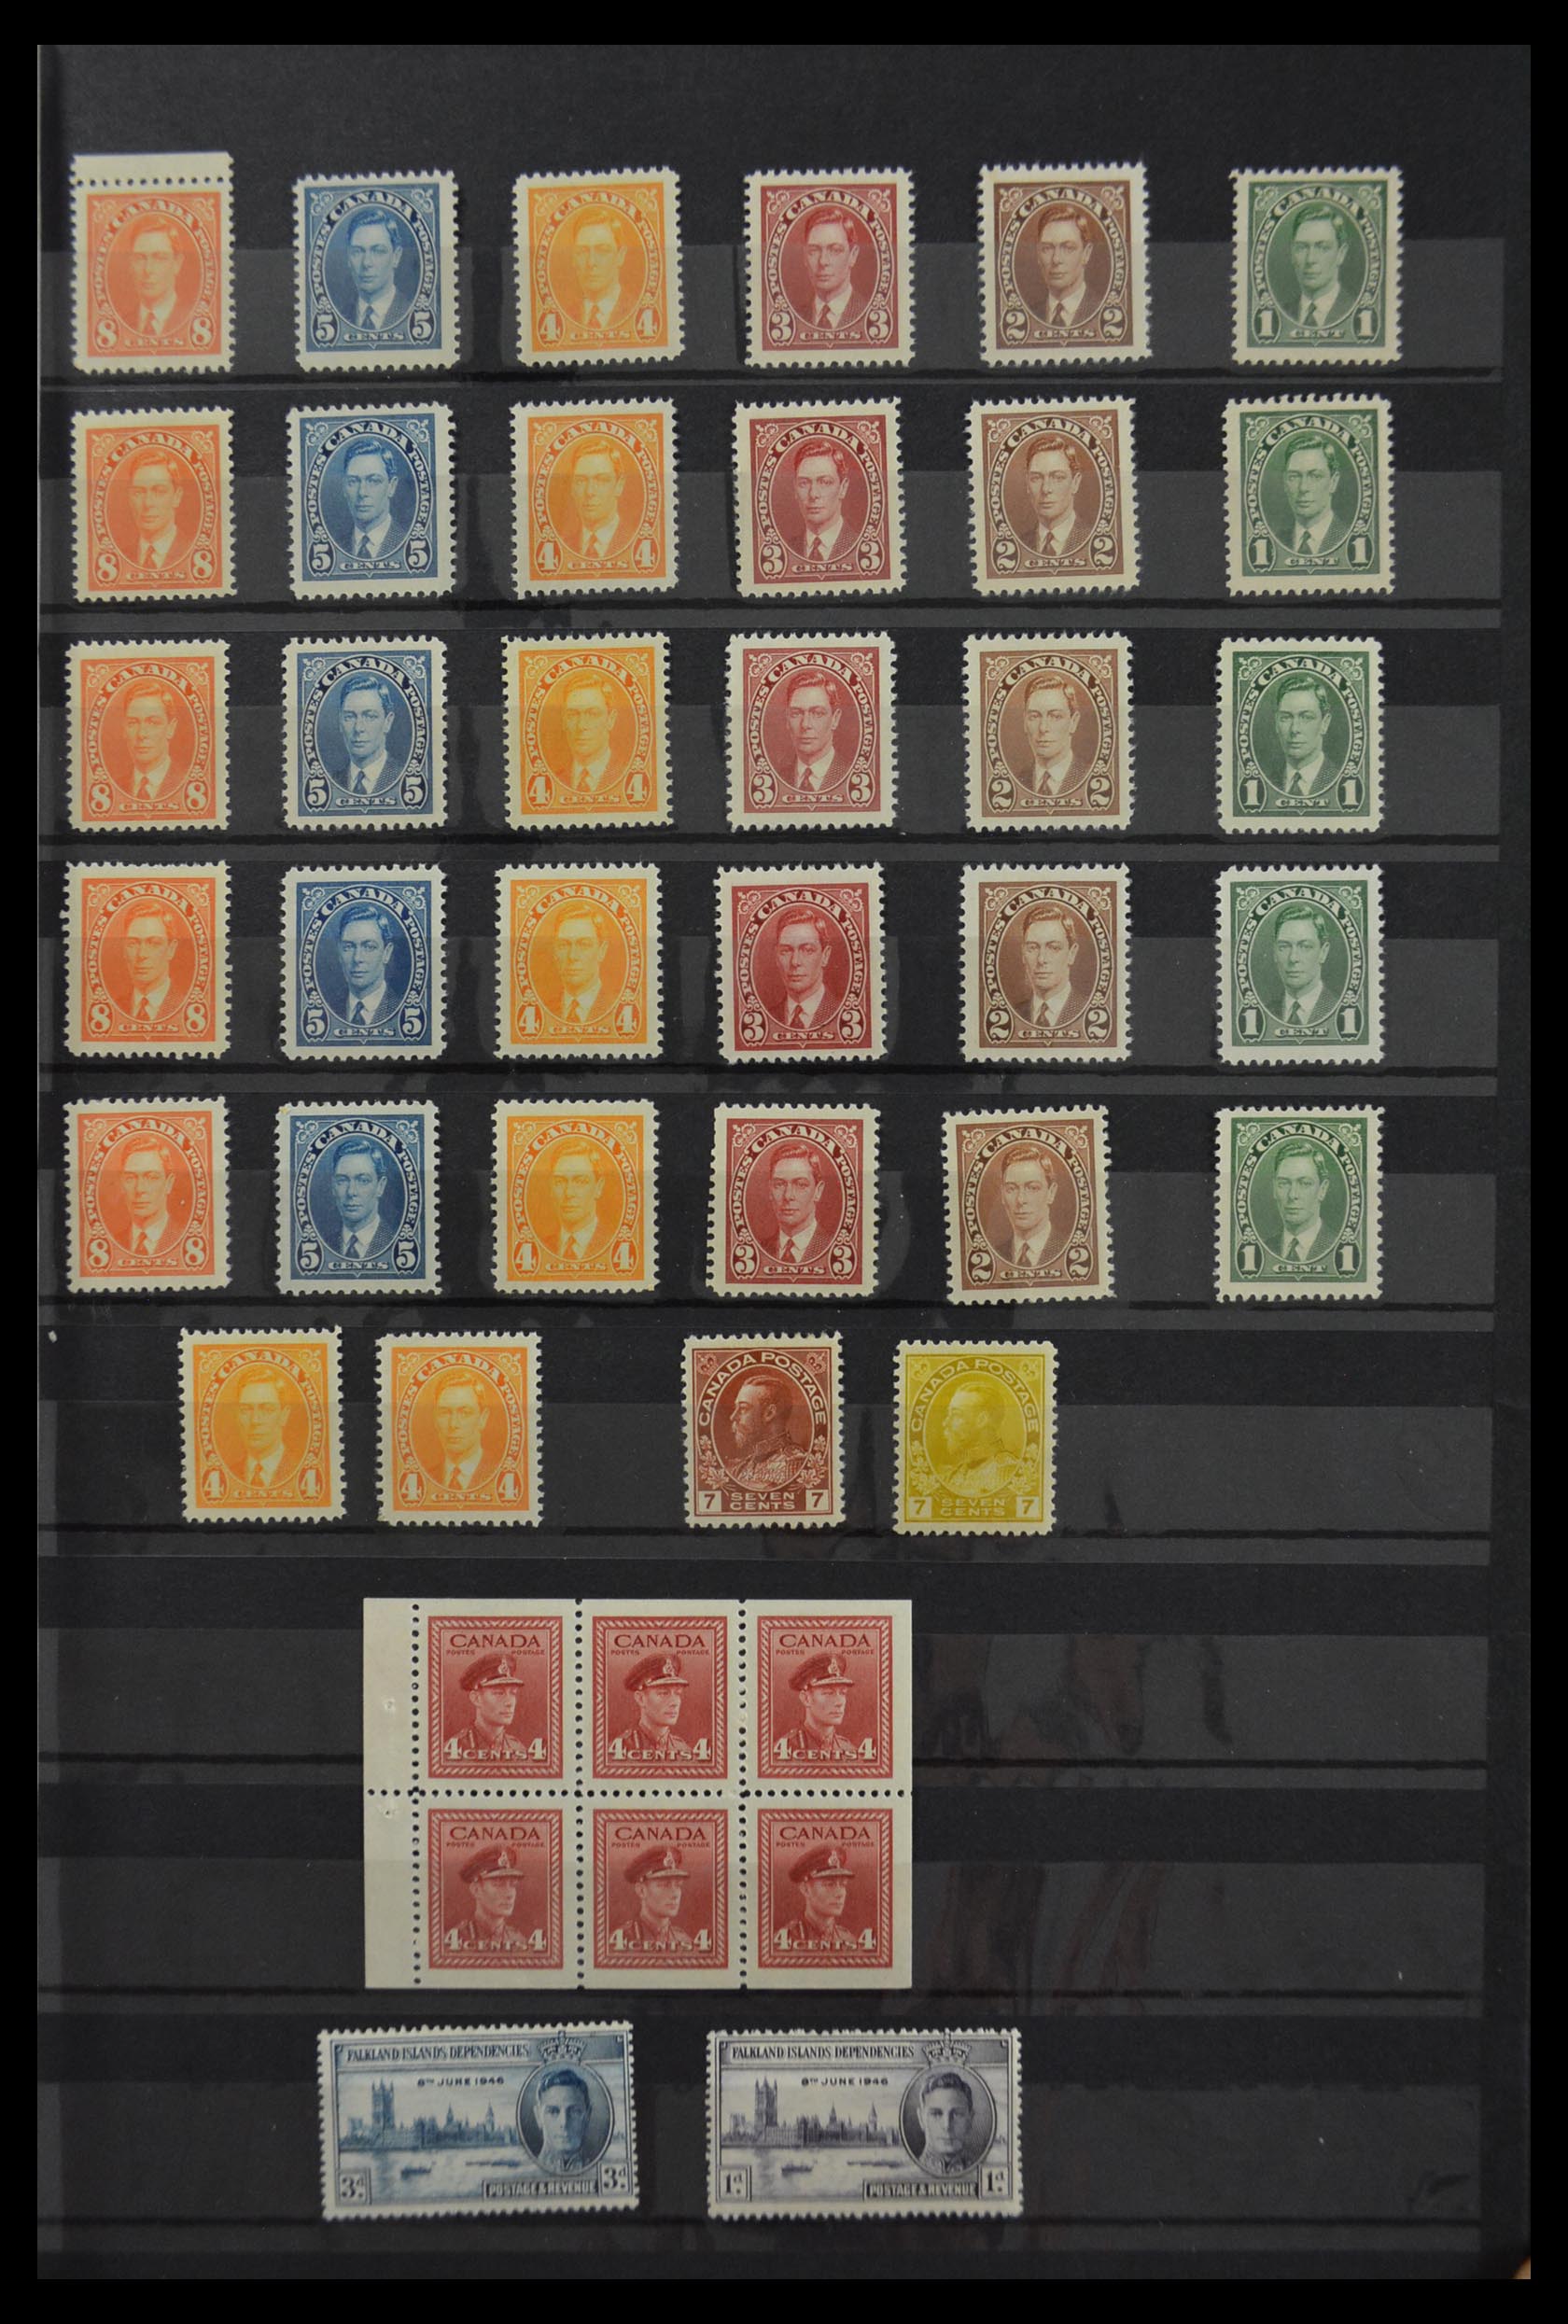 29940 579 - 29940 Great Britain and Colonies 1920-1970.